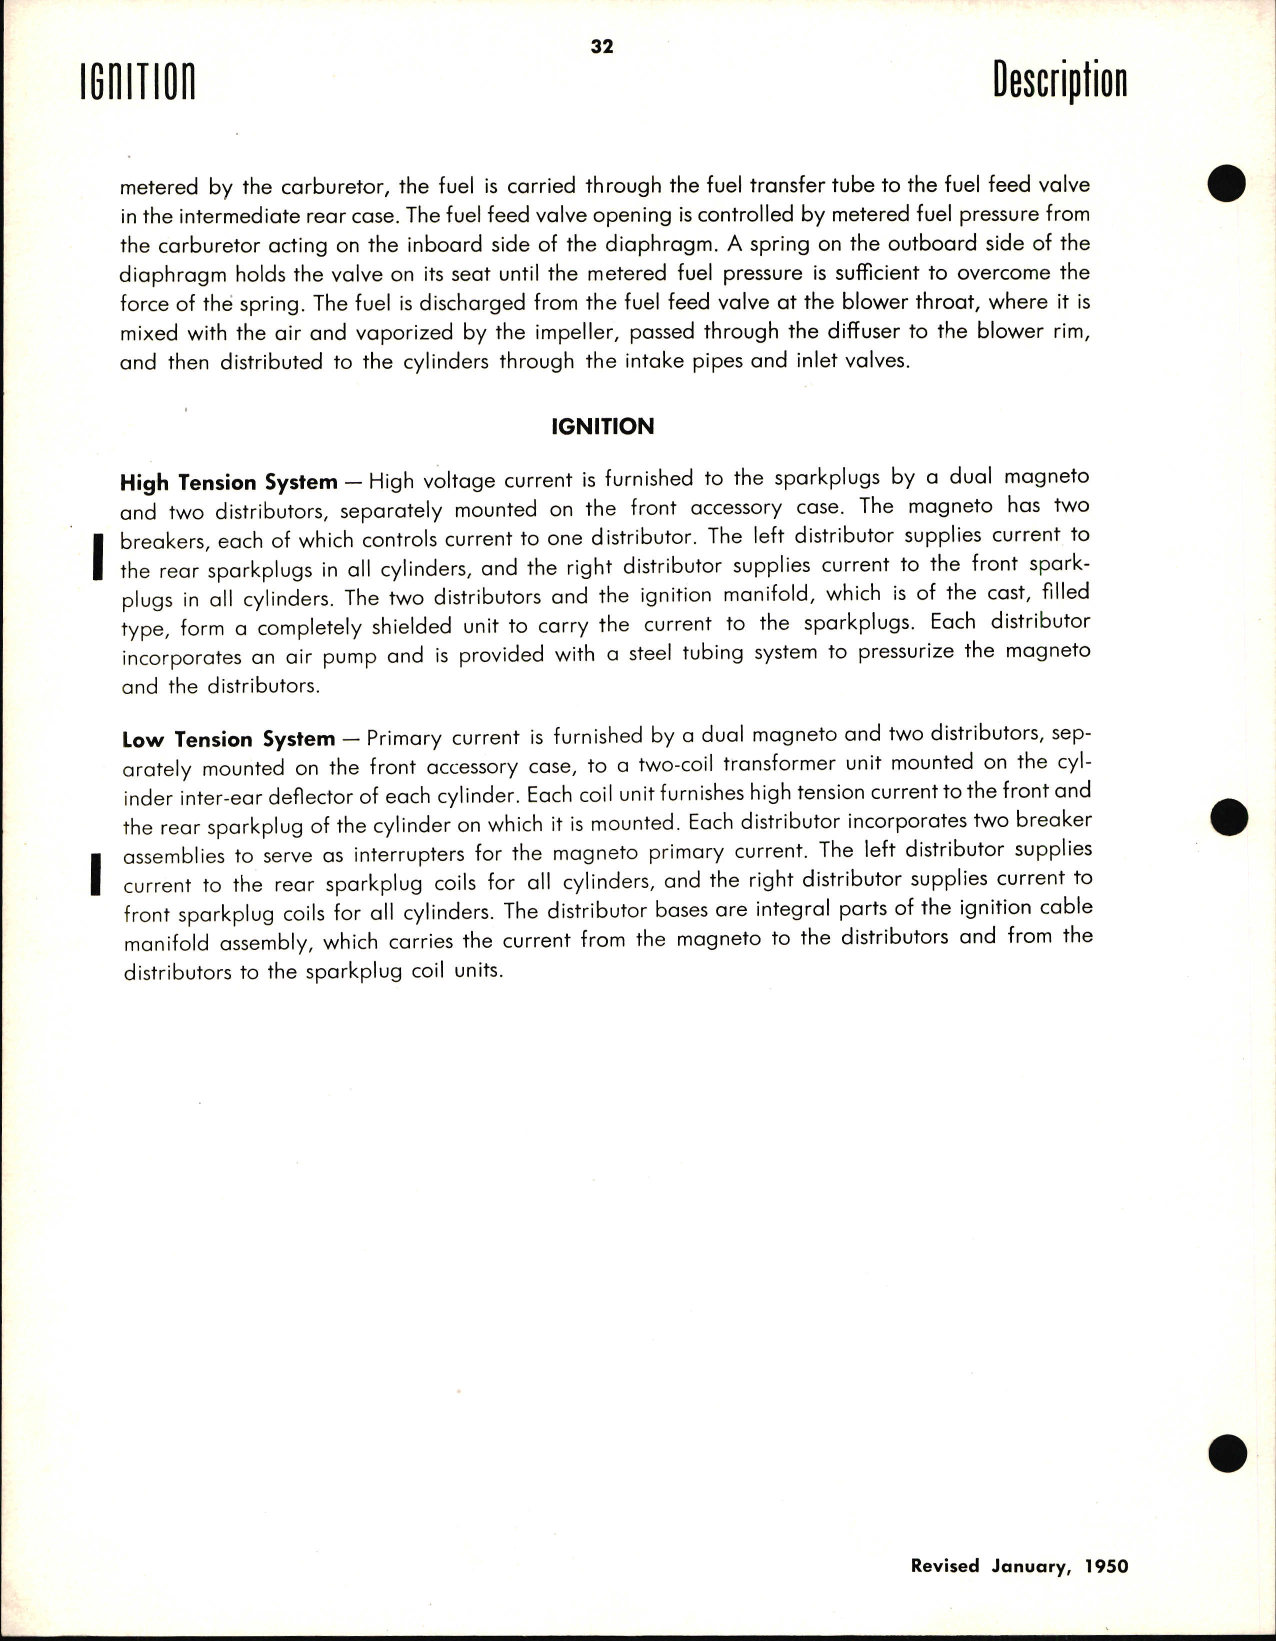 Sample page 8 from AirCorps Library document: Maintenance Manual for Double Wasp CA Series R-2800 Engine